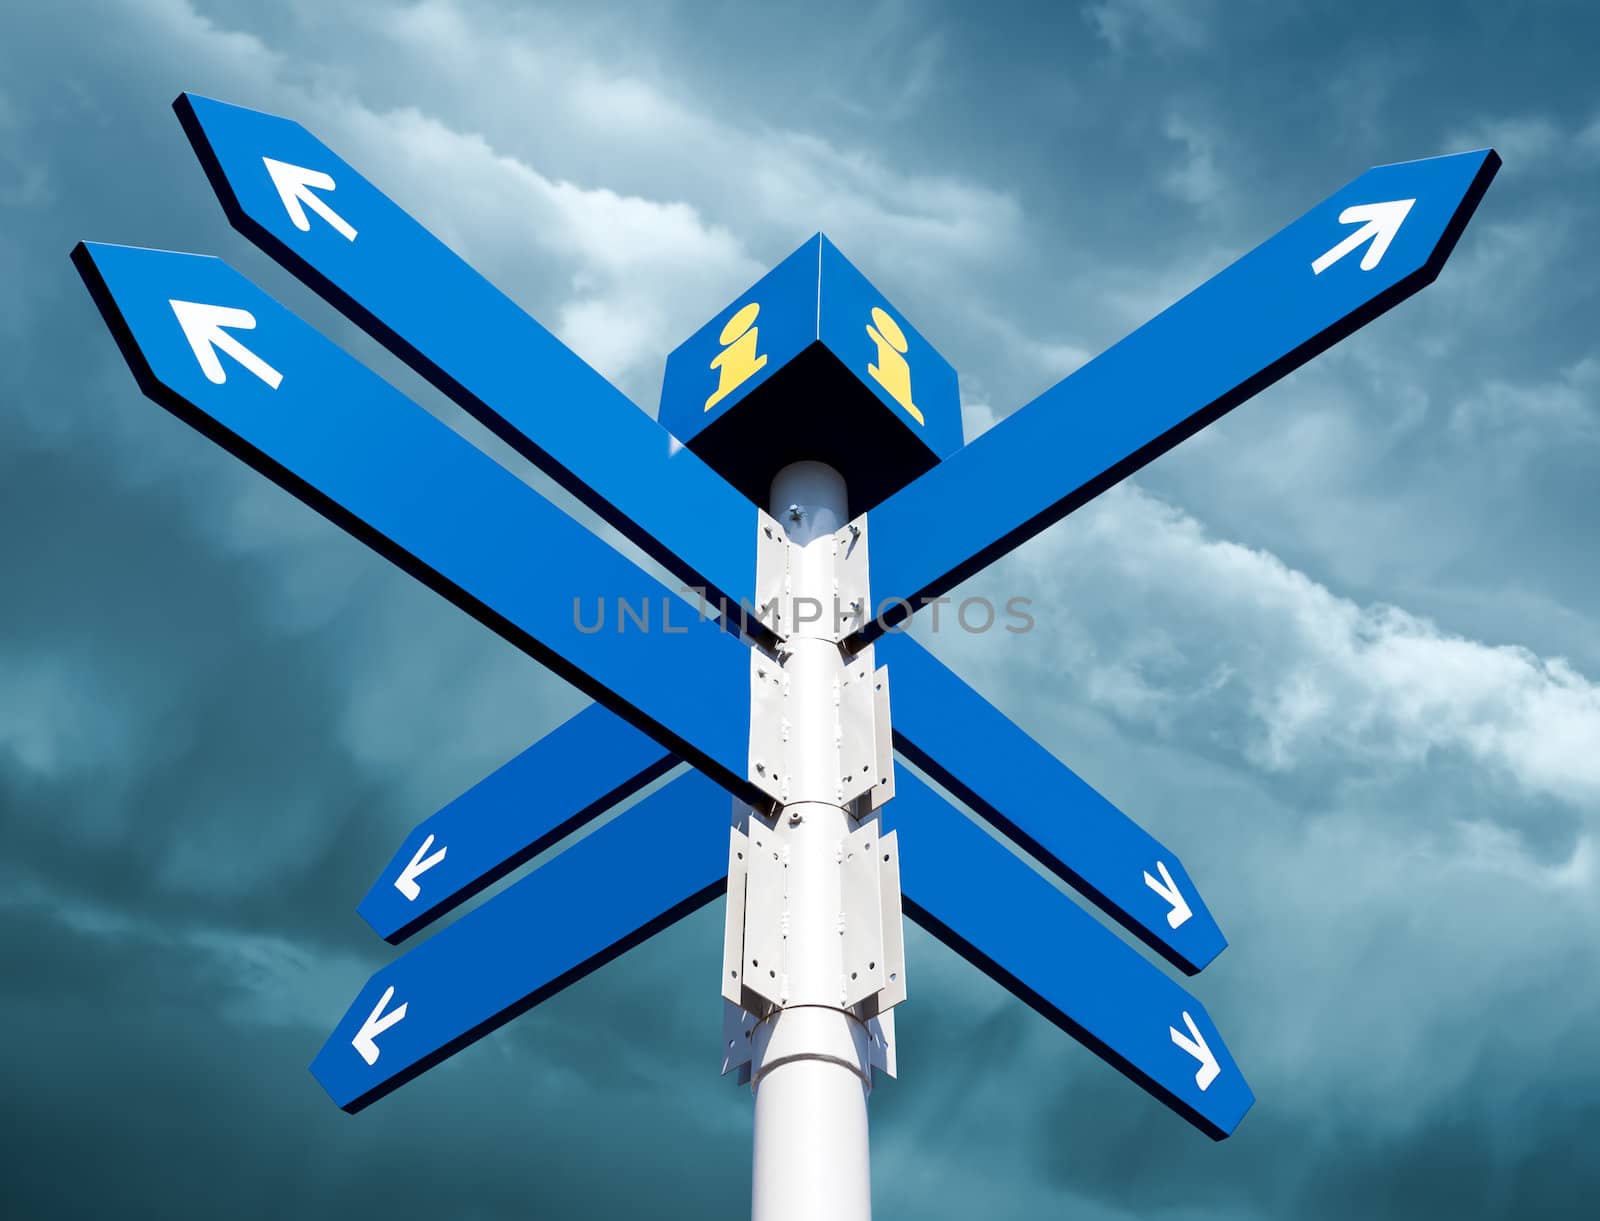 Blank directional road signs on sky background